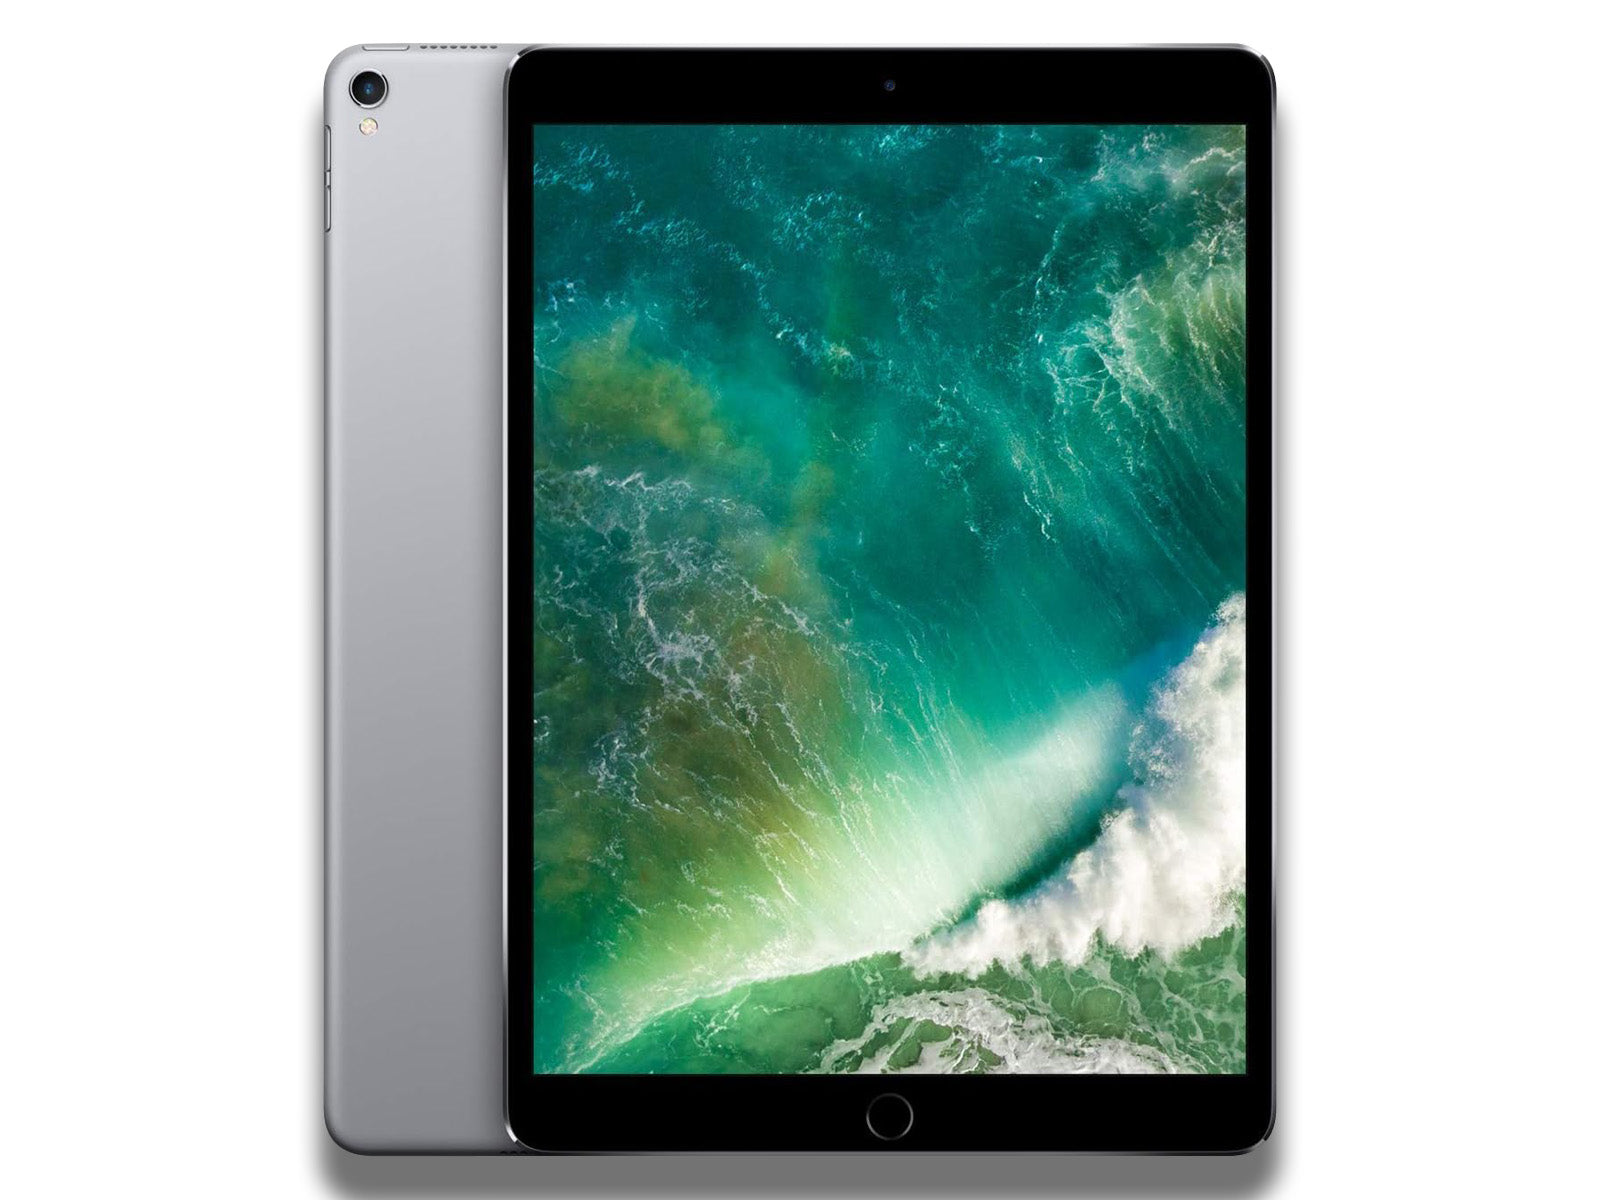 Apple iPad Pro 12.9-inch 2nd Generation In Silver Colour